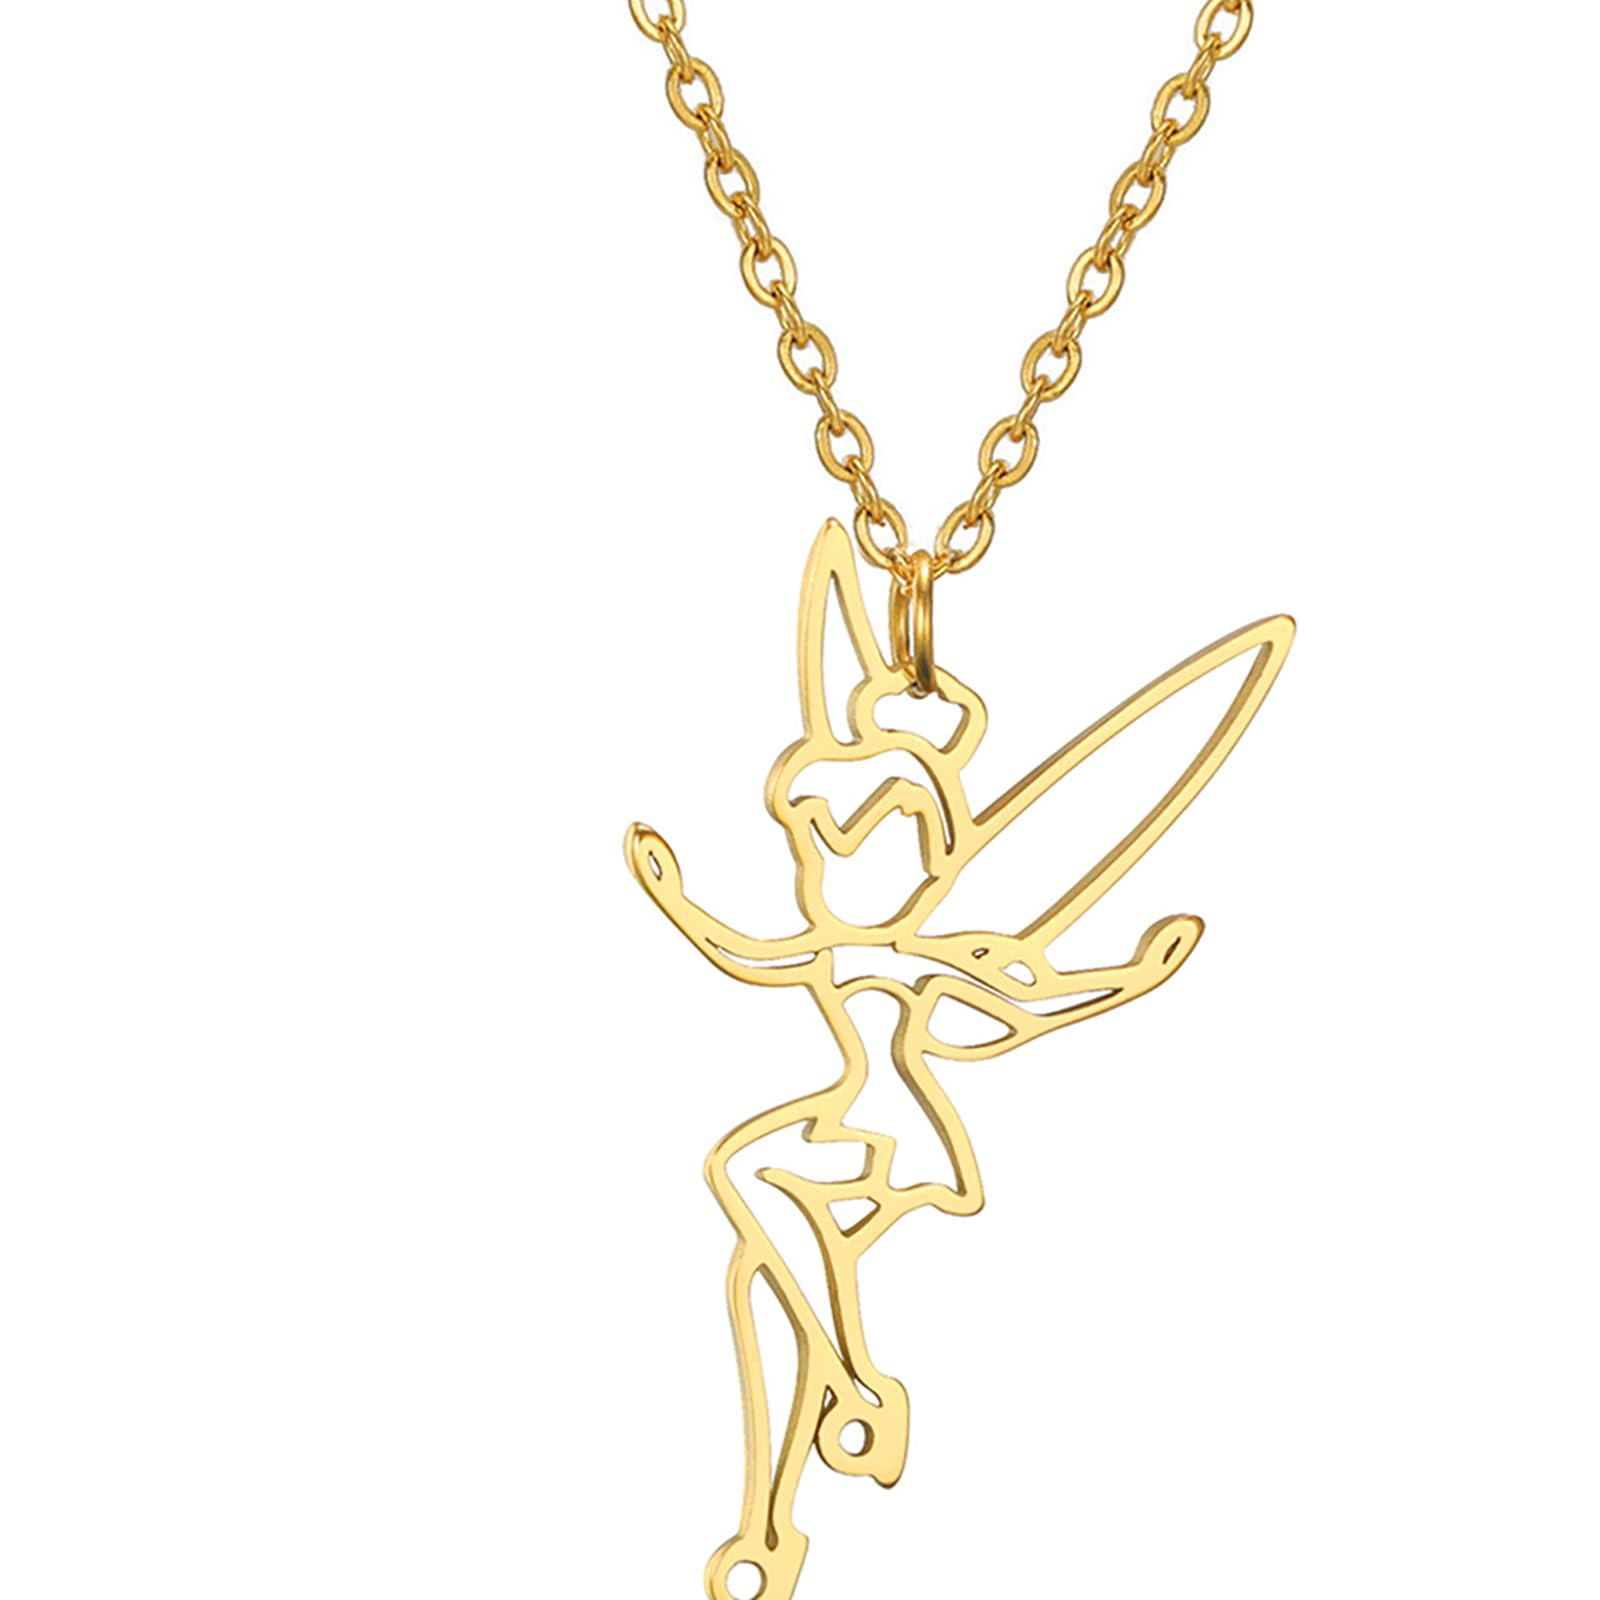 UNIFT Fairy Pixie Tinkerbell Silhouette Necklace For Women Girls Stainless Steel Exquisite Magical Pixie Angel Pendant Necklace Jewelry Gift